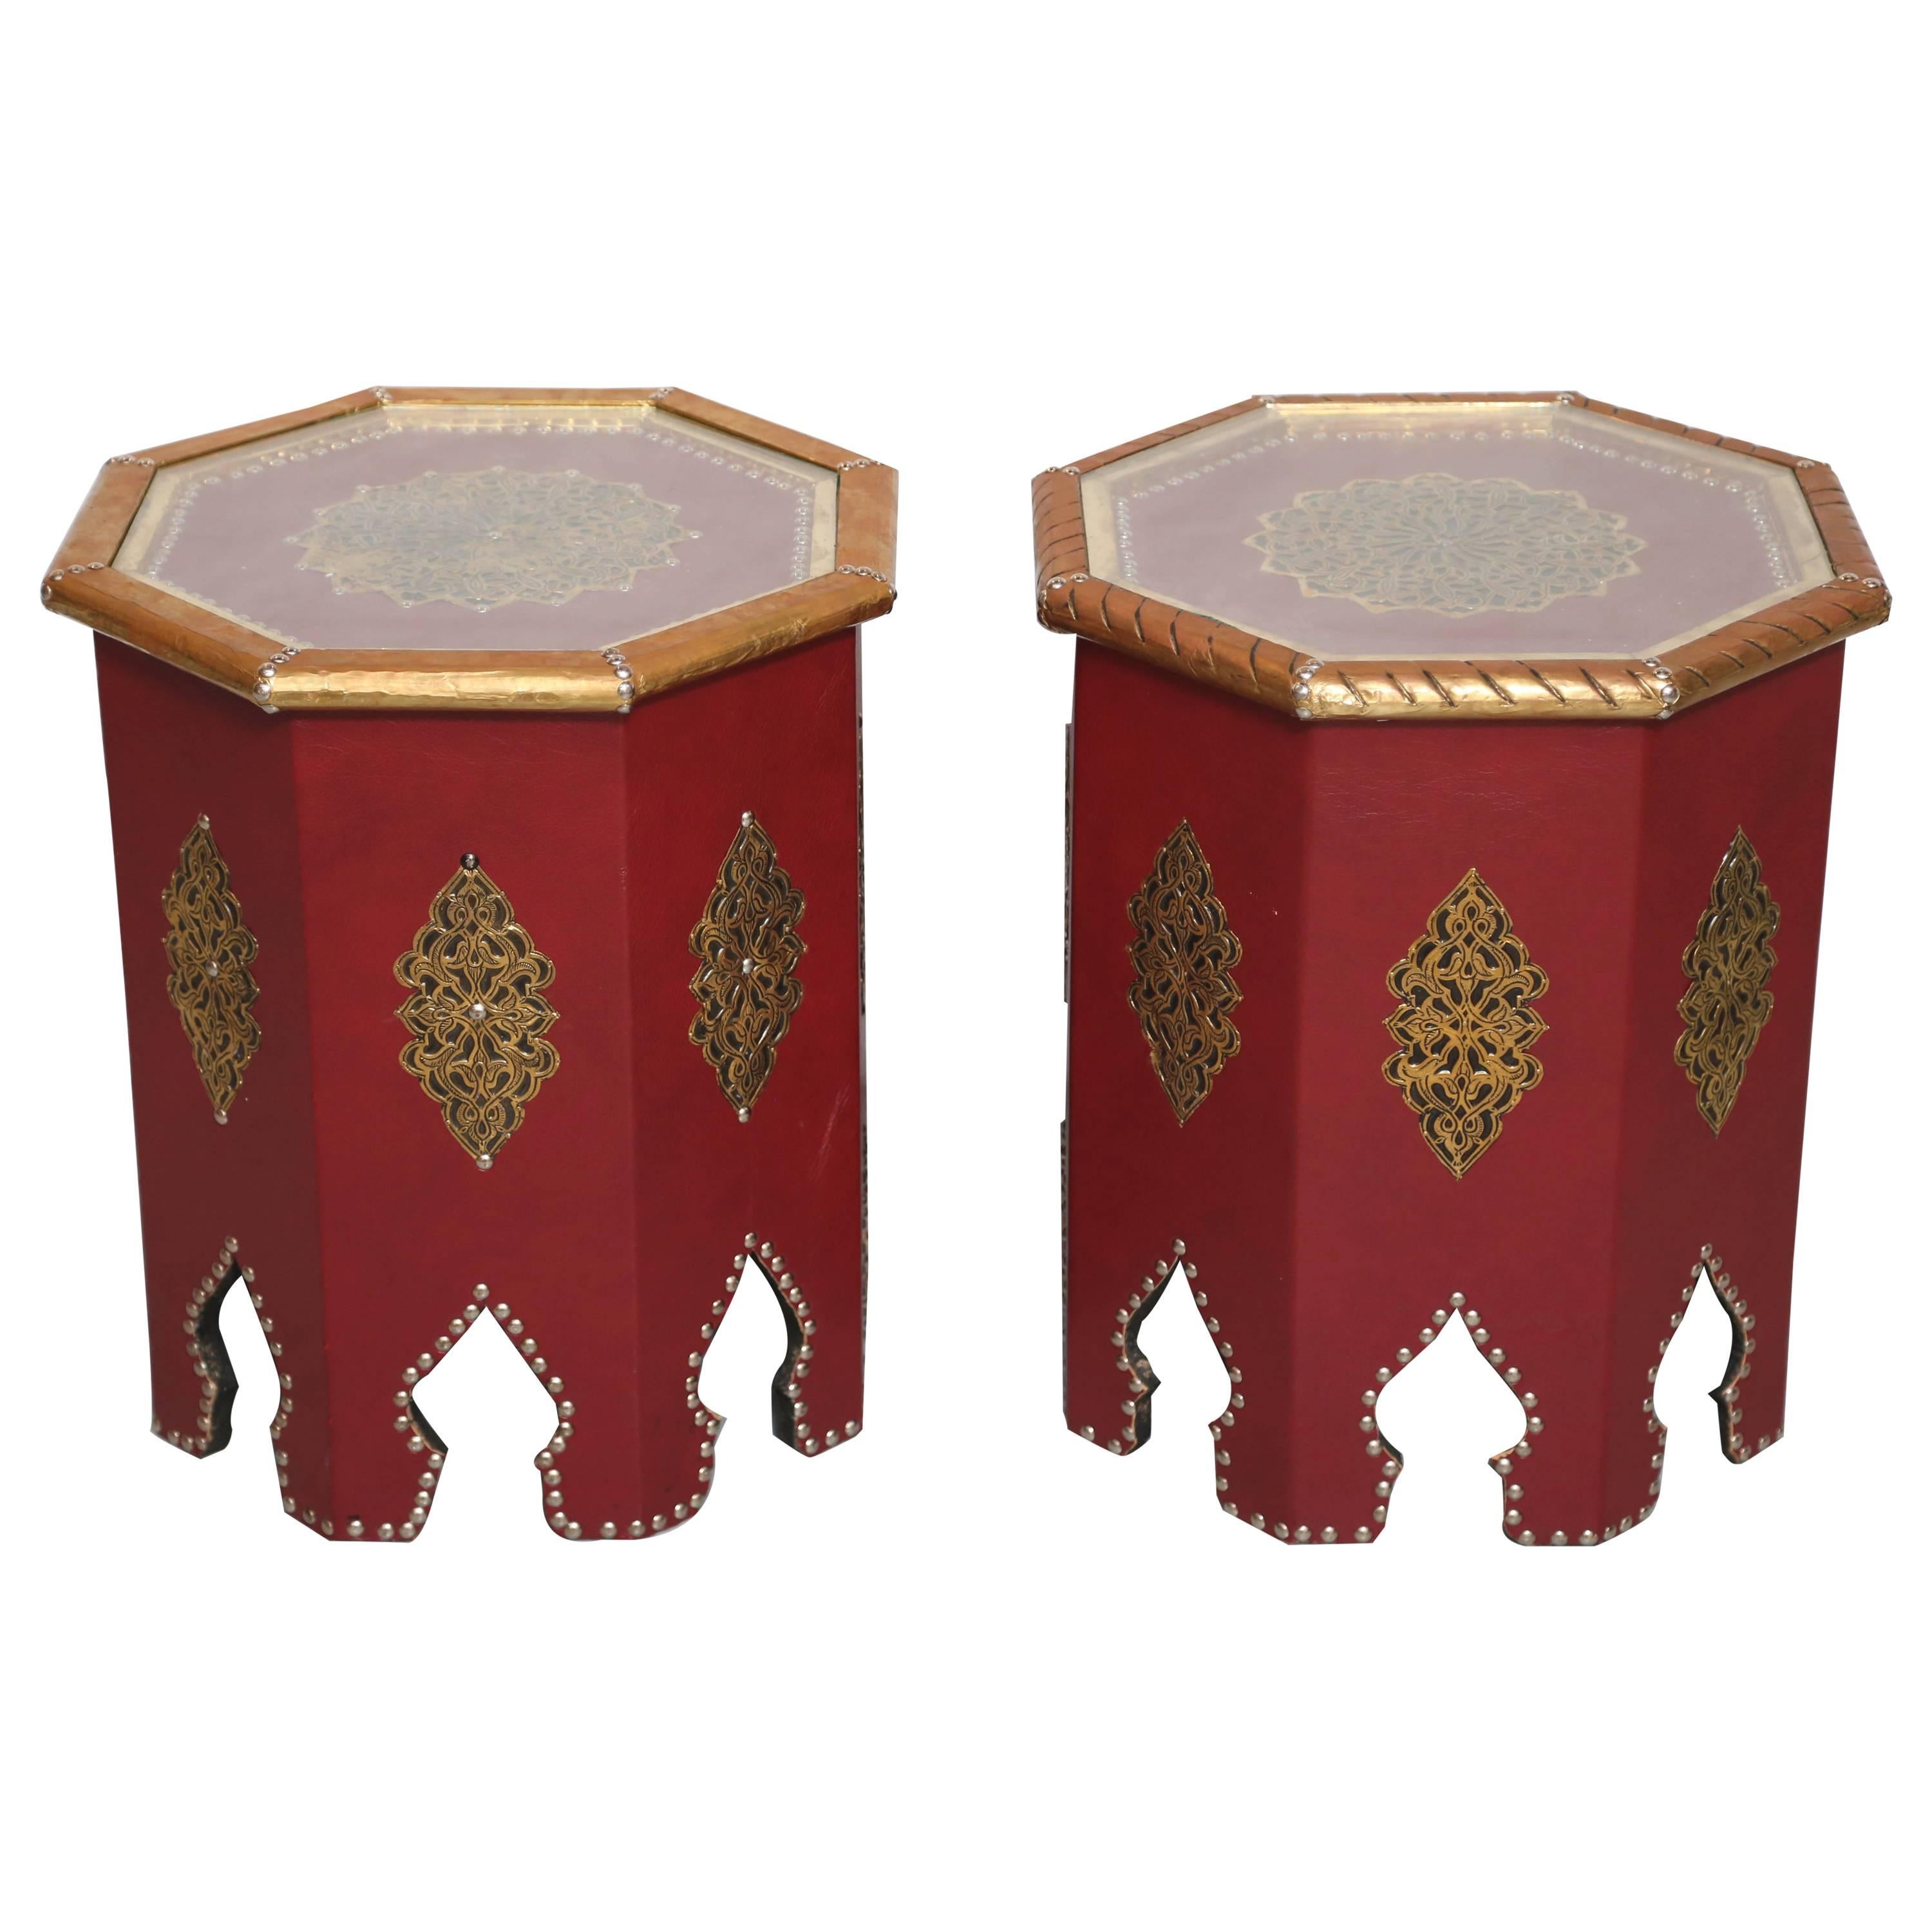 SALE !SALE! SALE !2 Moroccan Artisan, Handmade, Red Leather TABLES red and gold For Sale